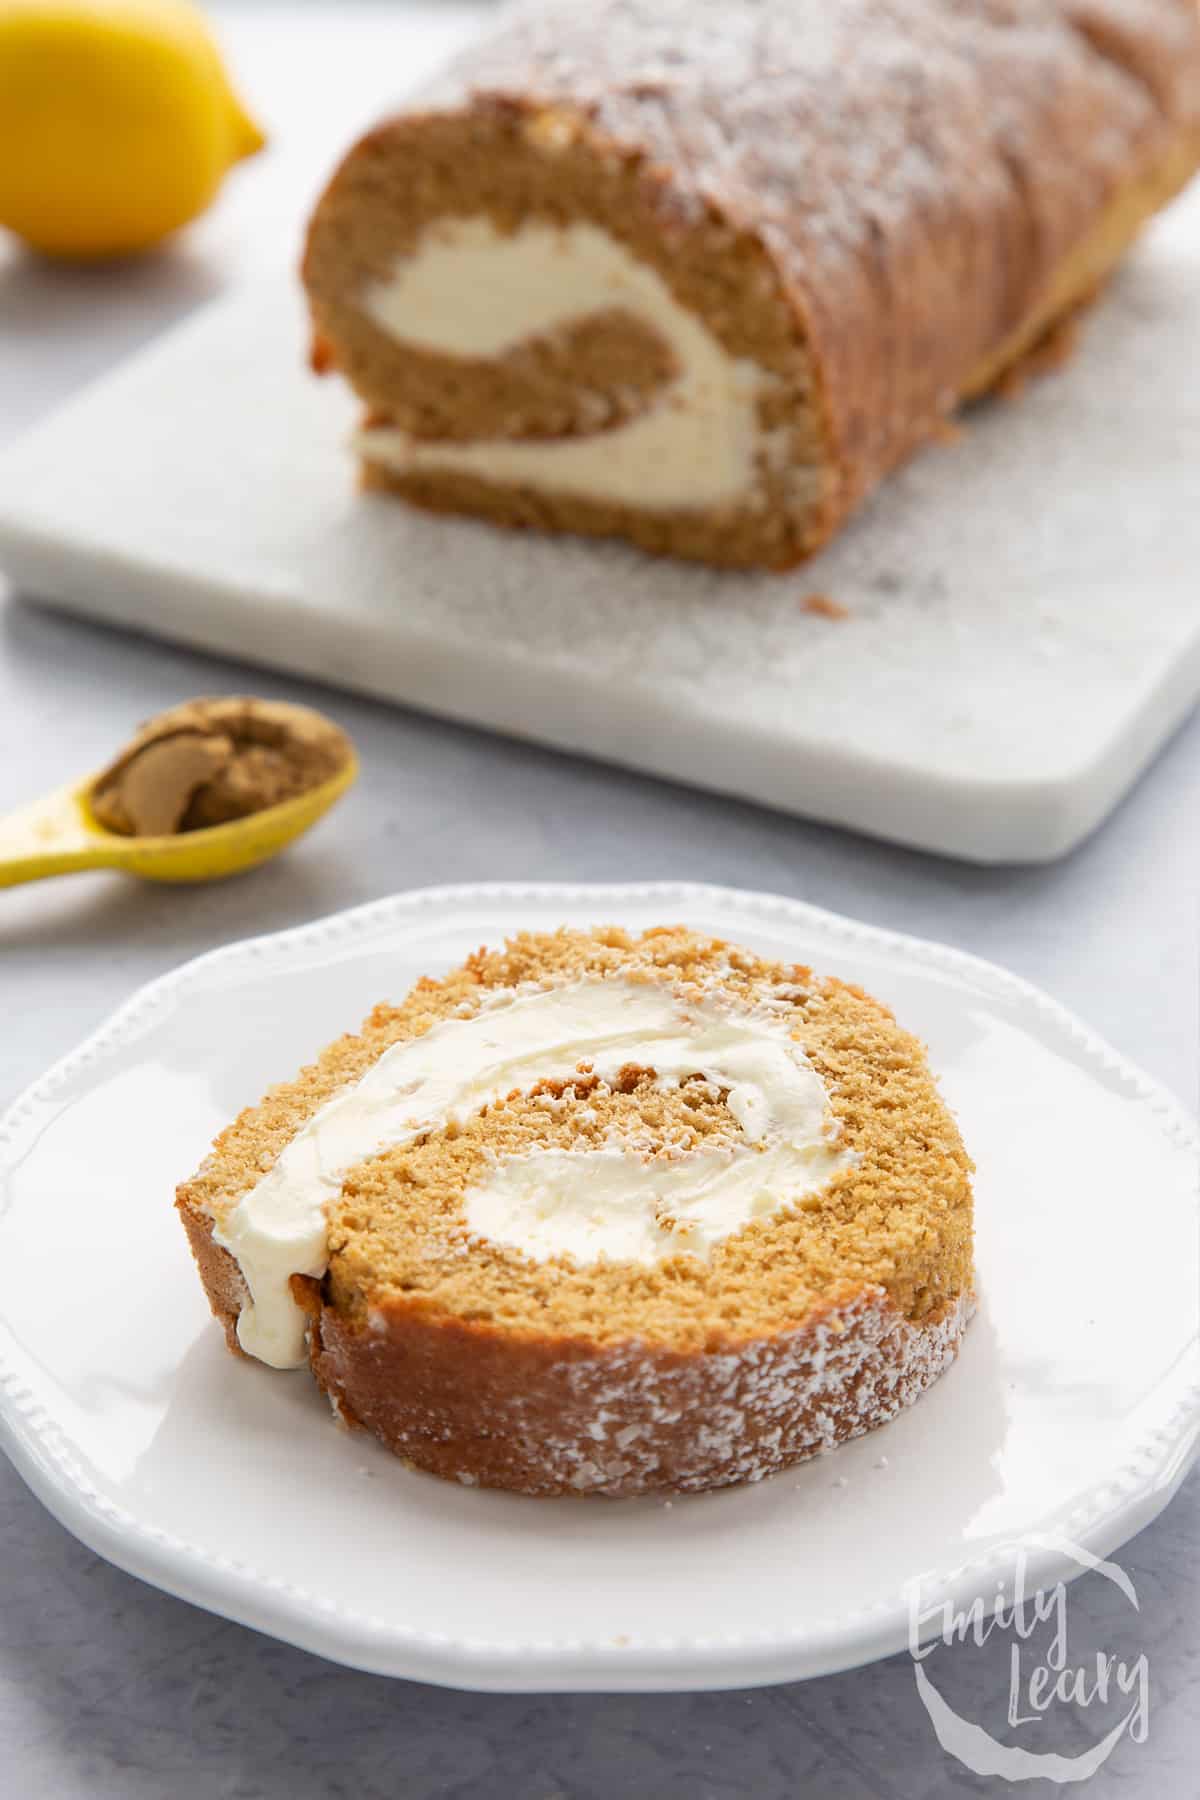 A slice of gingerbread Swiss roll on a white plate.